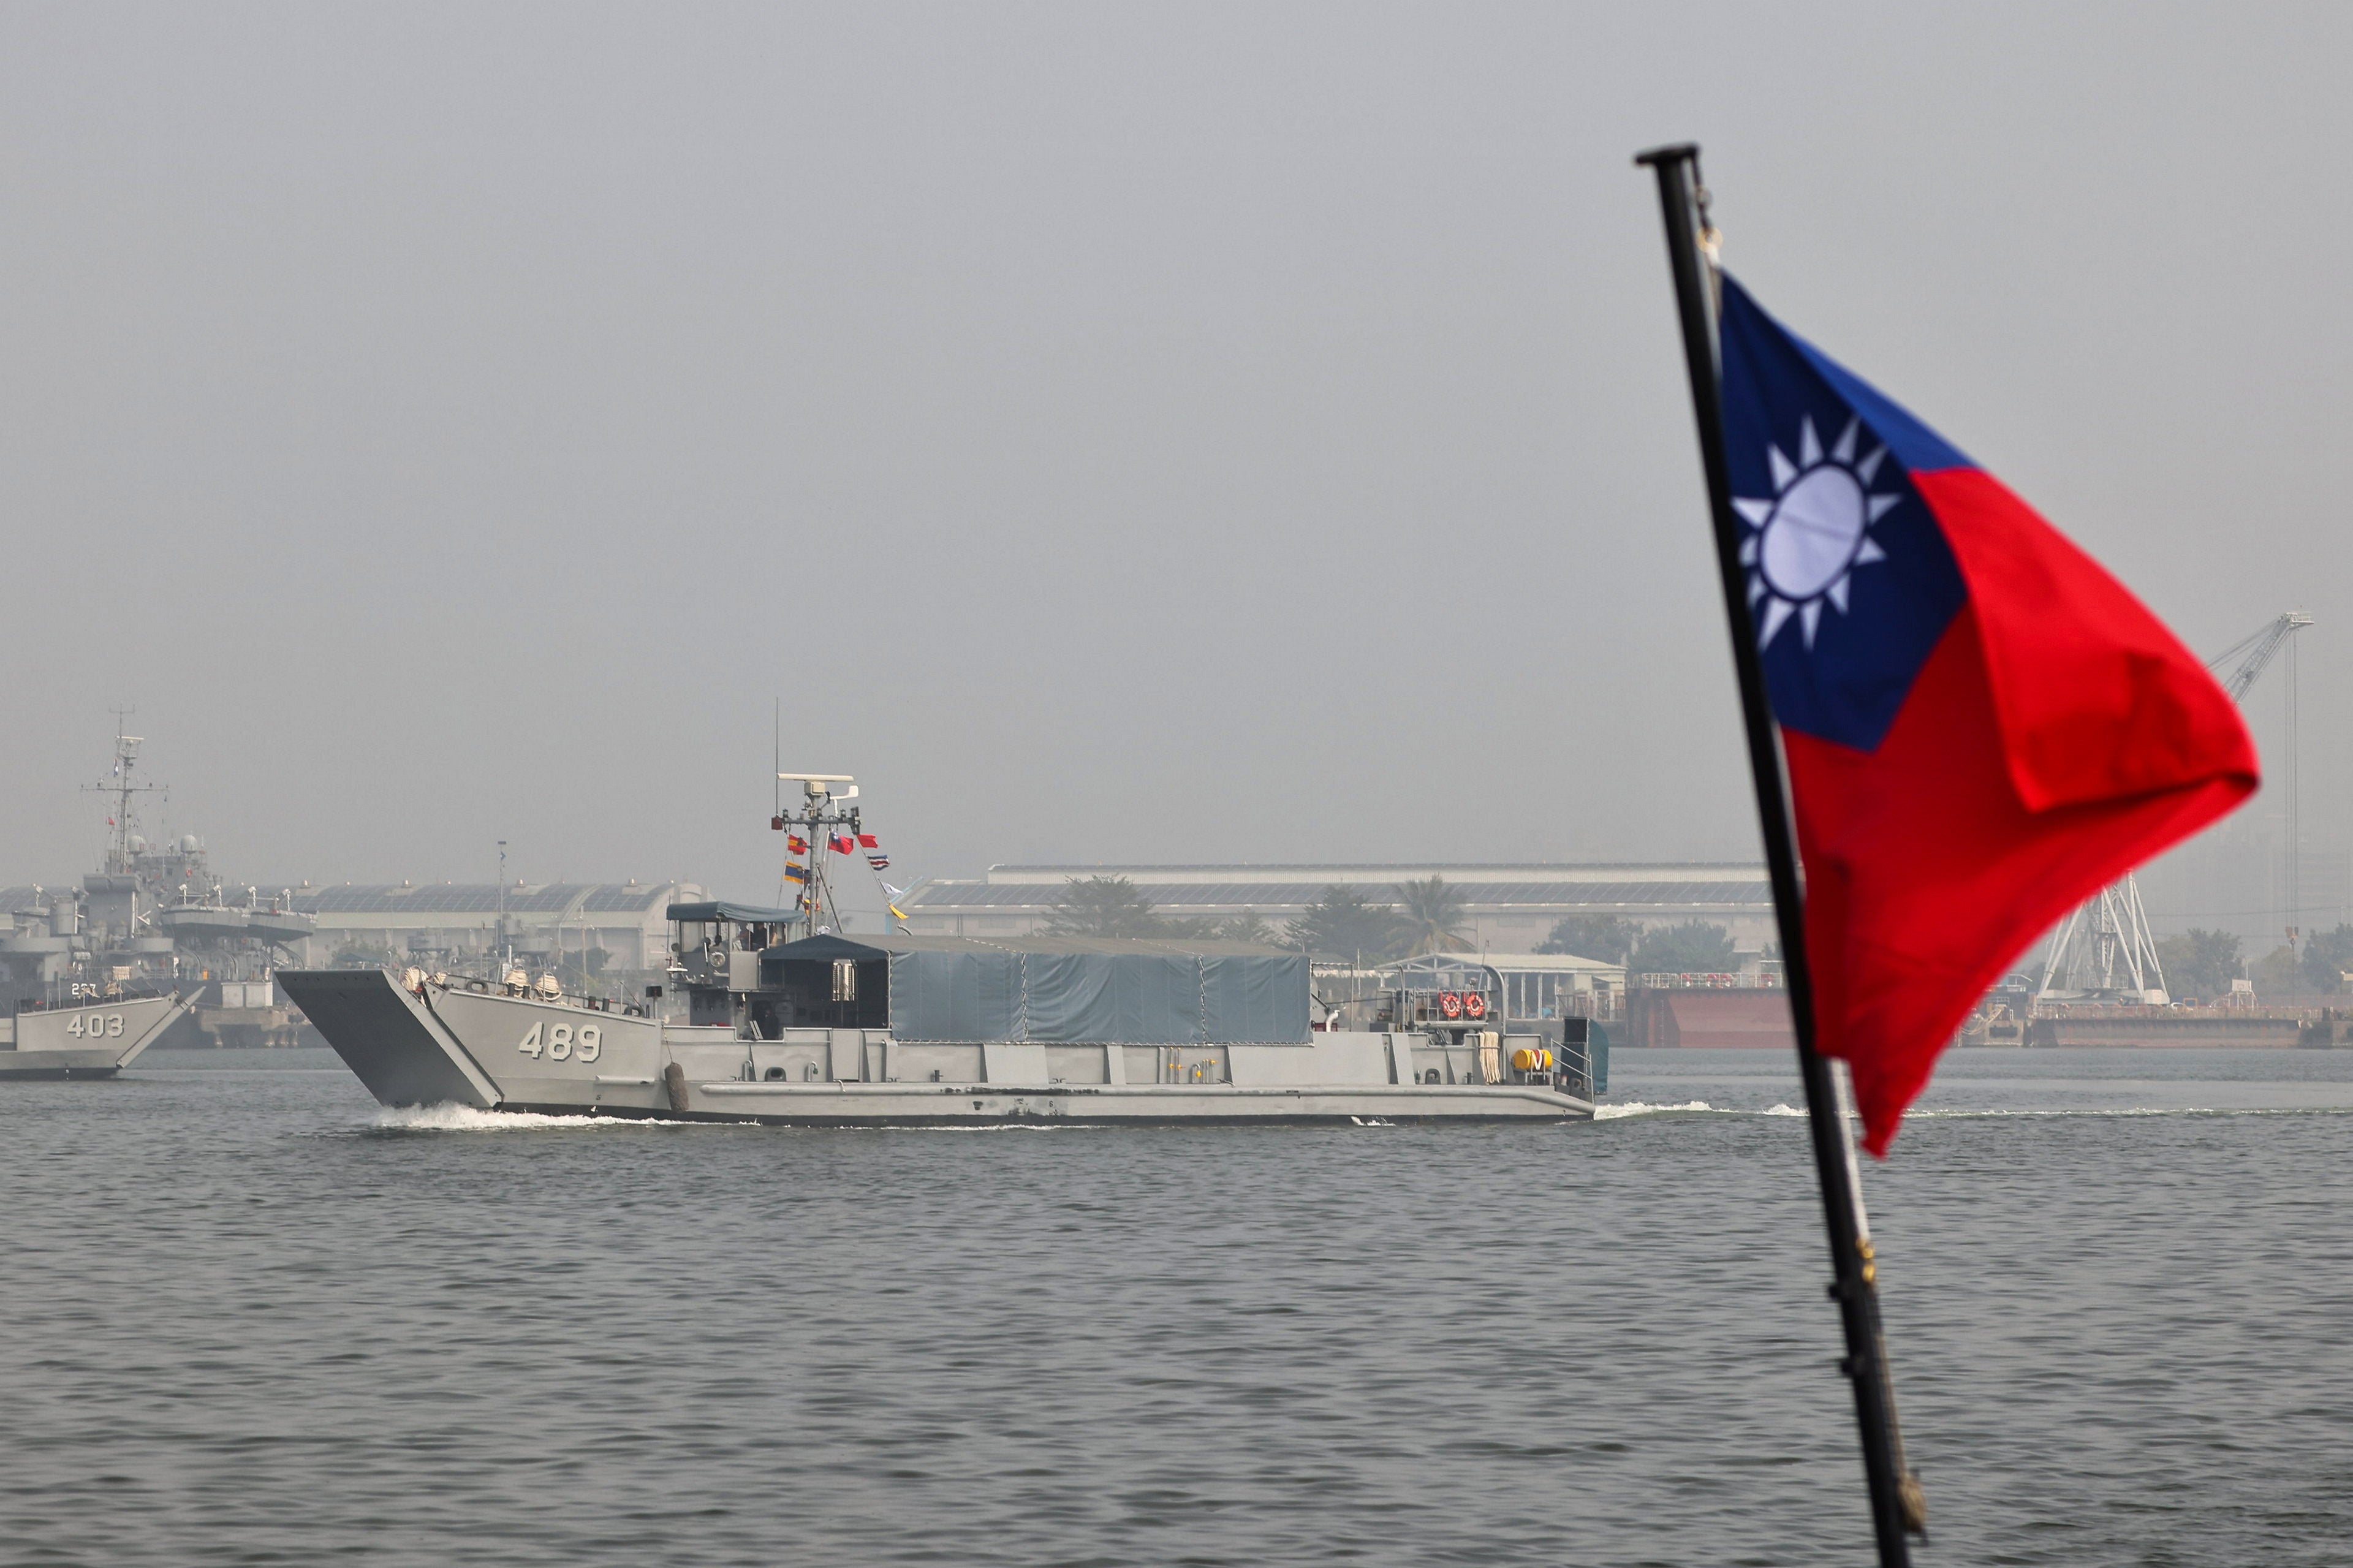 A Taiwan flag is seen during a navy drill ahead of the Lunar New Year